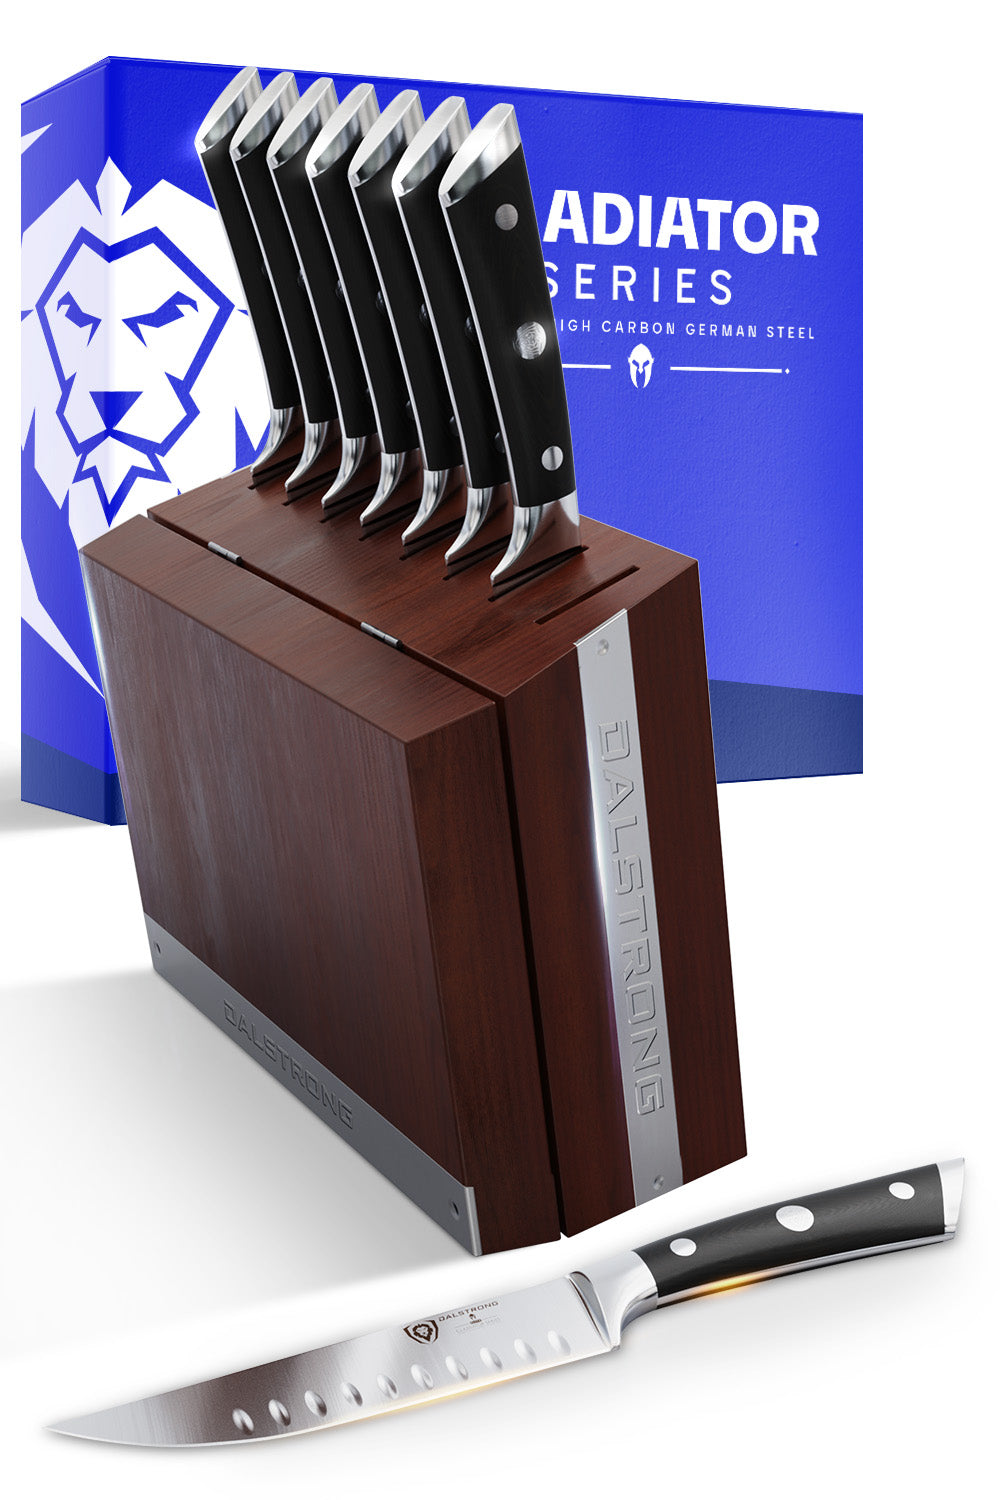 Dalstrong gladiator series 8 piece steak knife set with black handles in front of it's premium packaging.